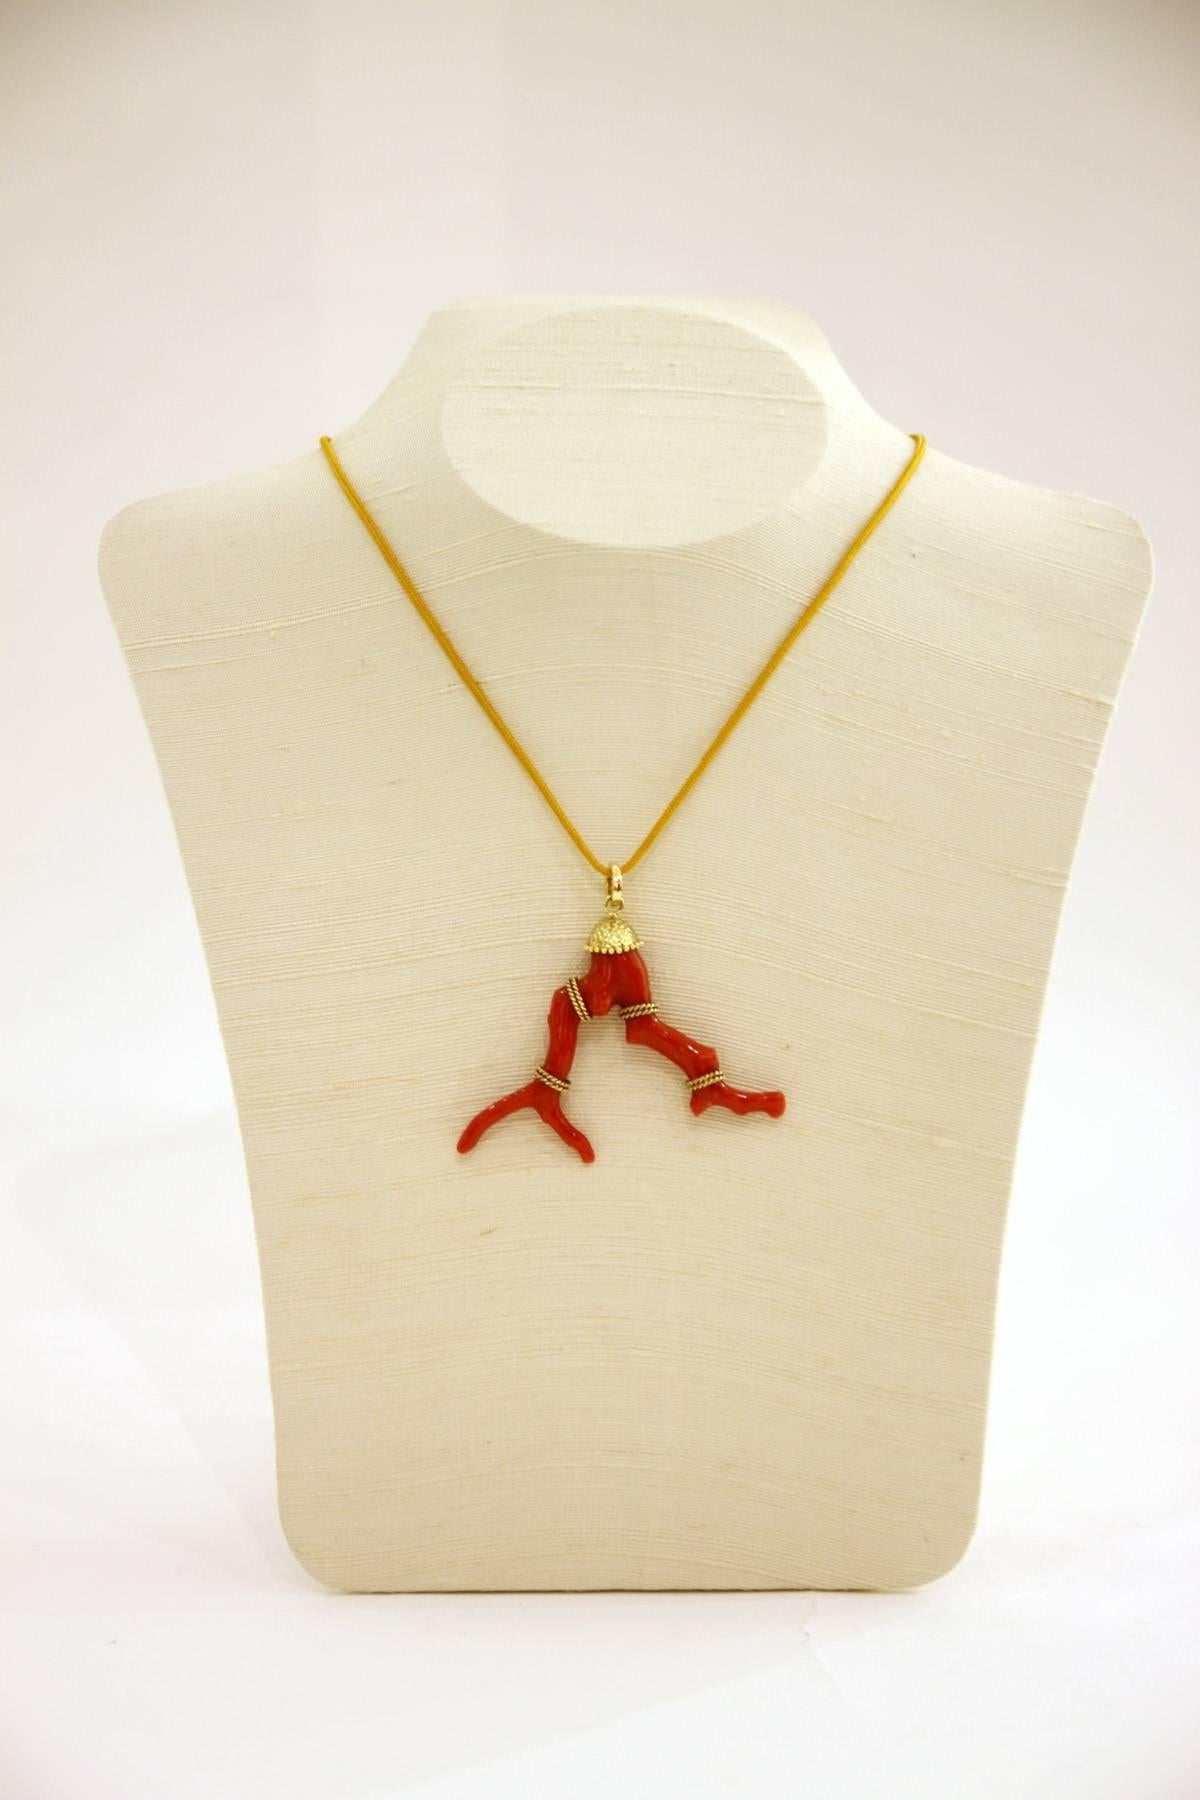 A handcrafted Sardinian branch coral pendant decorated with hand-hammered 18 karat gold, 2 7/16”W x 2"H (6.5 cm W x 5cm H) & with loose opening clasp

A beautiful example of a classic coral branch pendant, the arms wrapped in 18K twisted